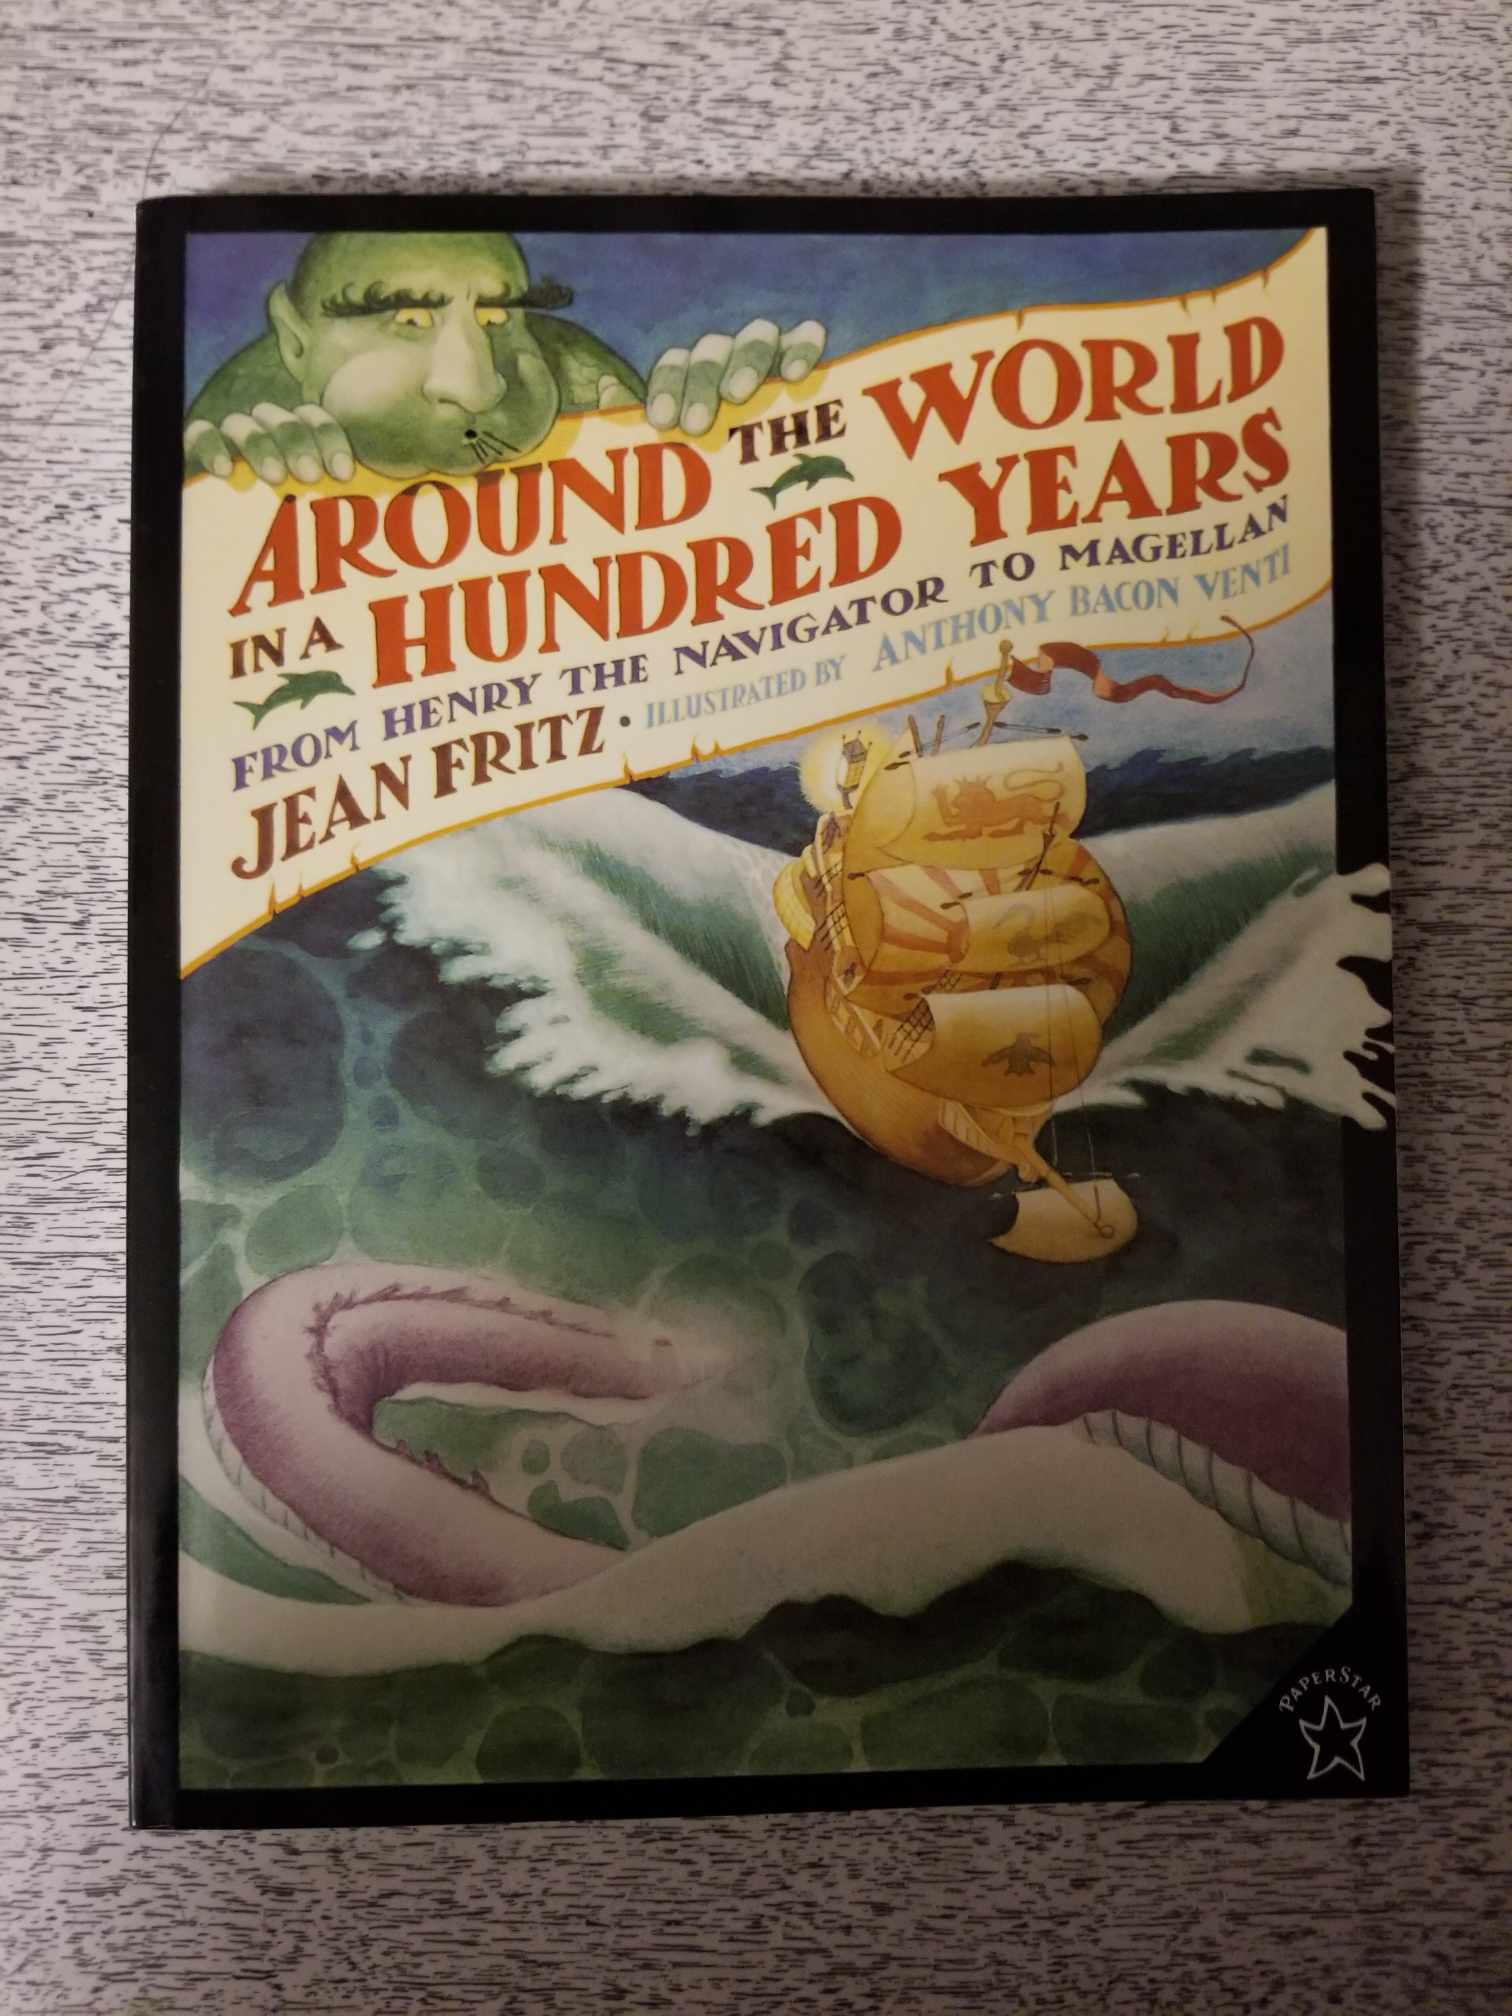 Around the World in a Hundred Years